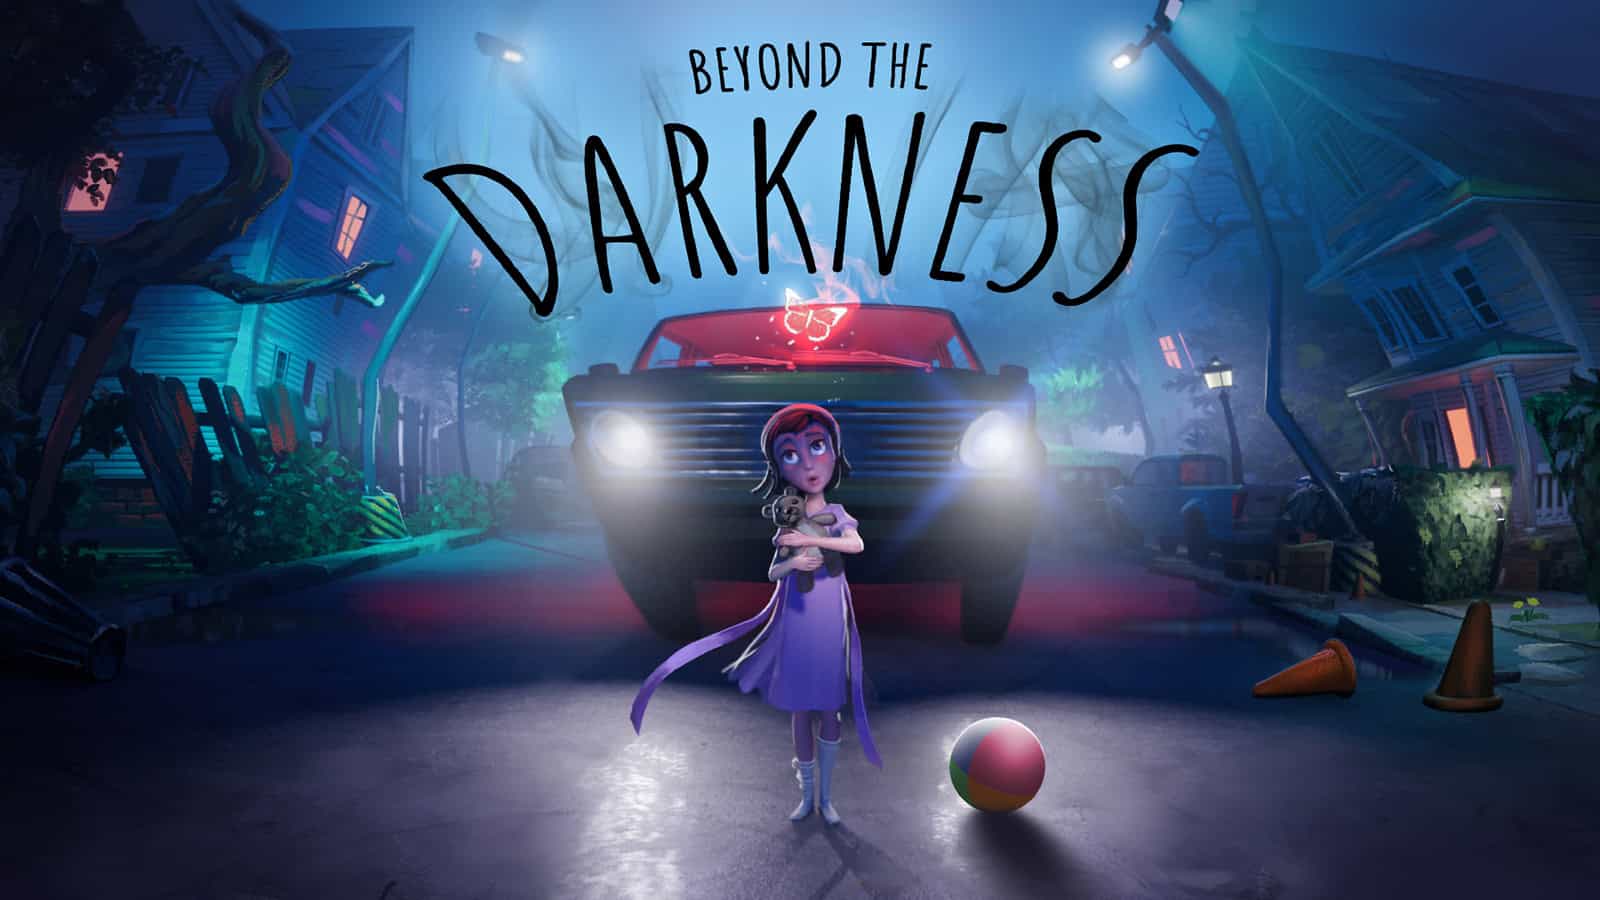 The artwork for Beyond The Darkness, featuring child Millie